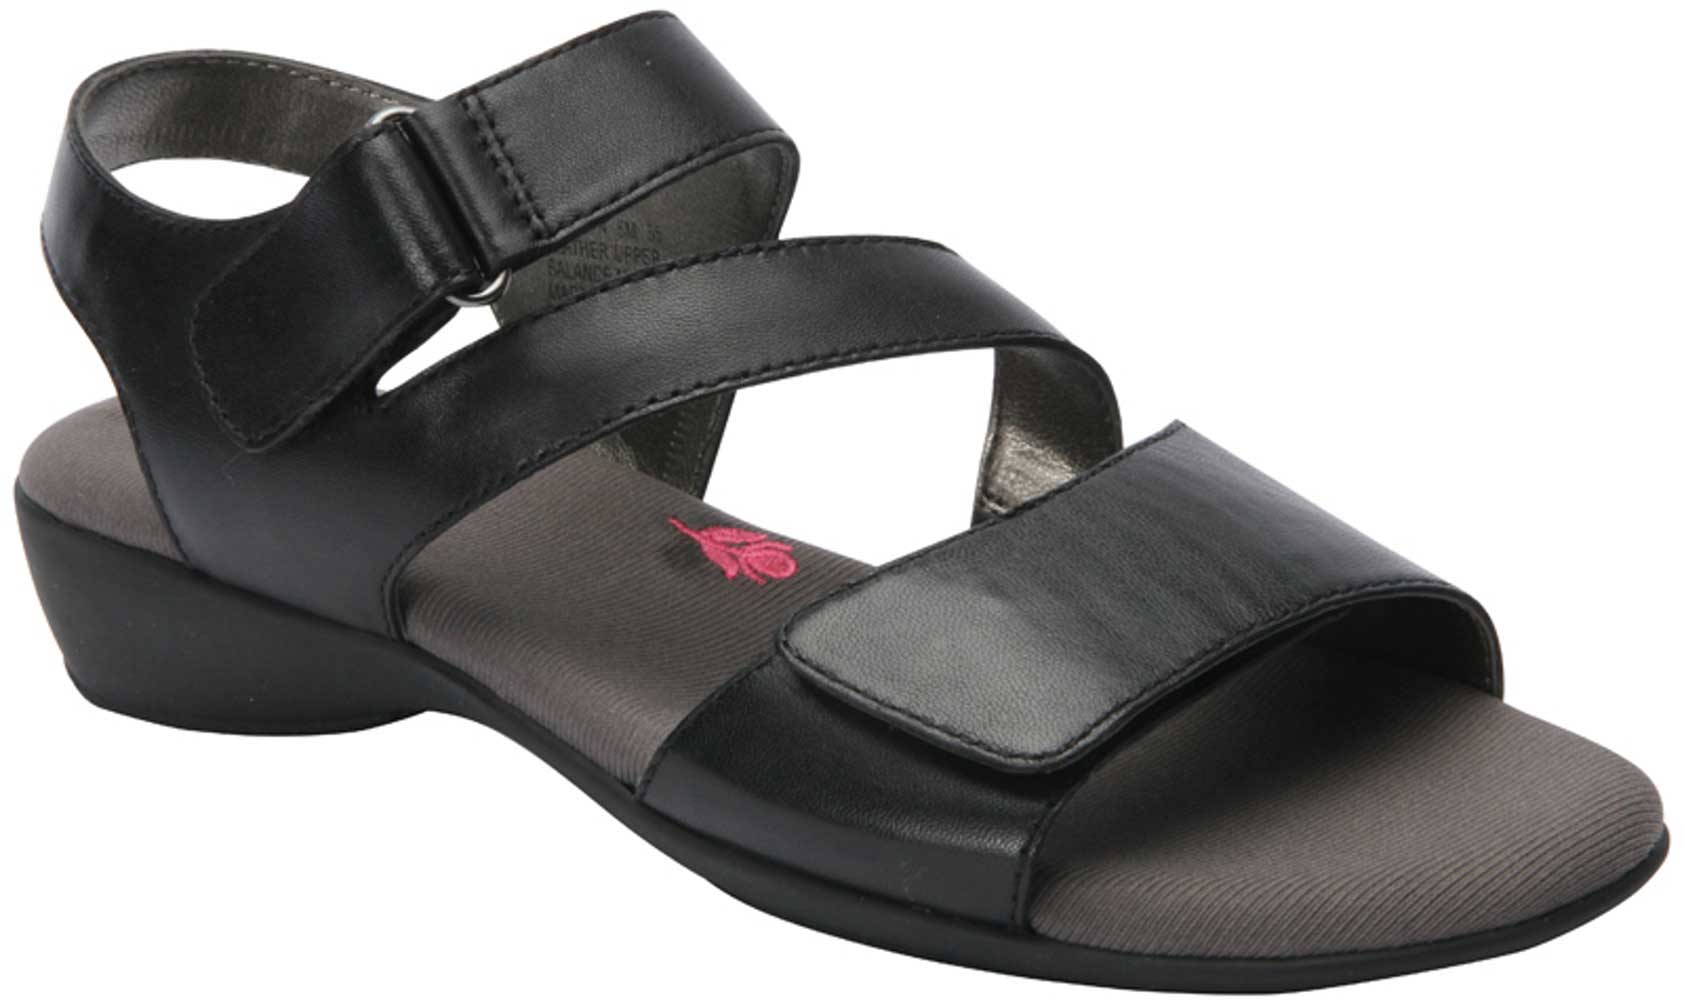 Ros Hommerson Marilyn 67005 - Women's Casual Comfort Sandal - Narrow - X-Wide